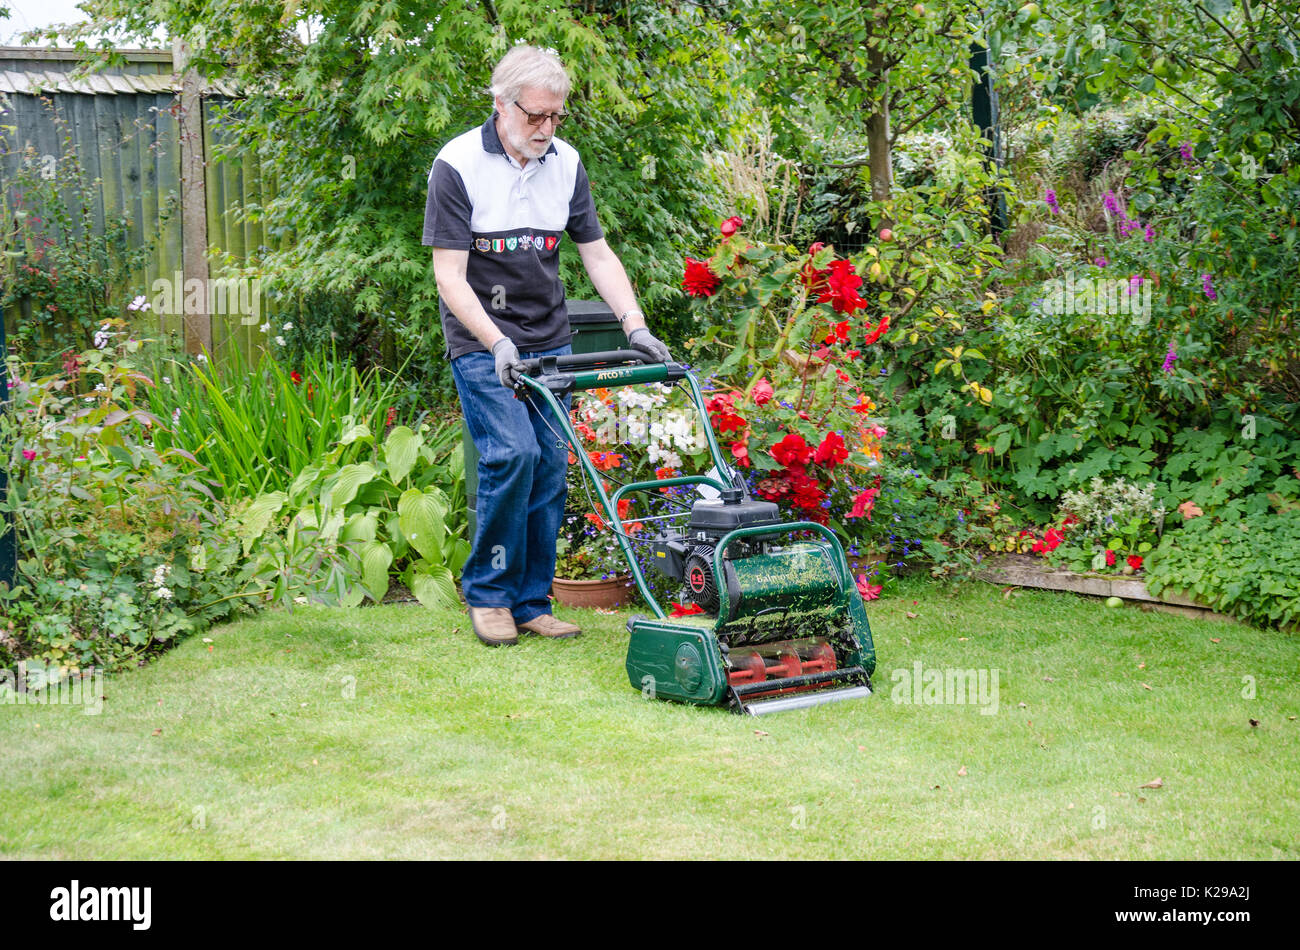 A man cuts his back lawn with a petrol powered lawn mower. Stock Photo